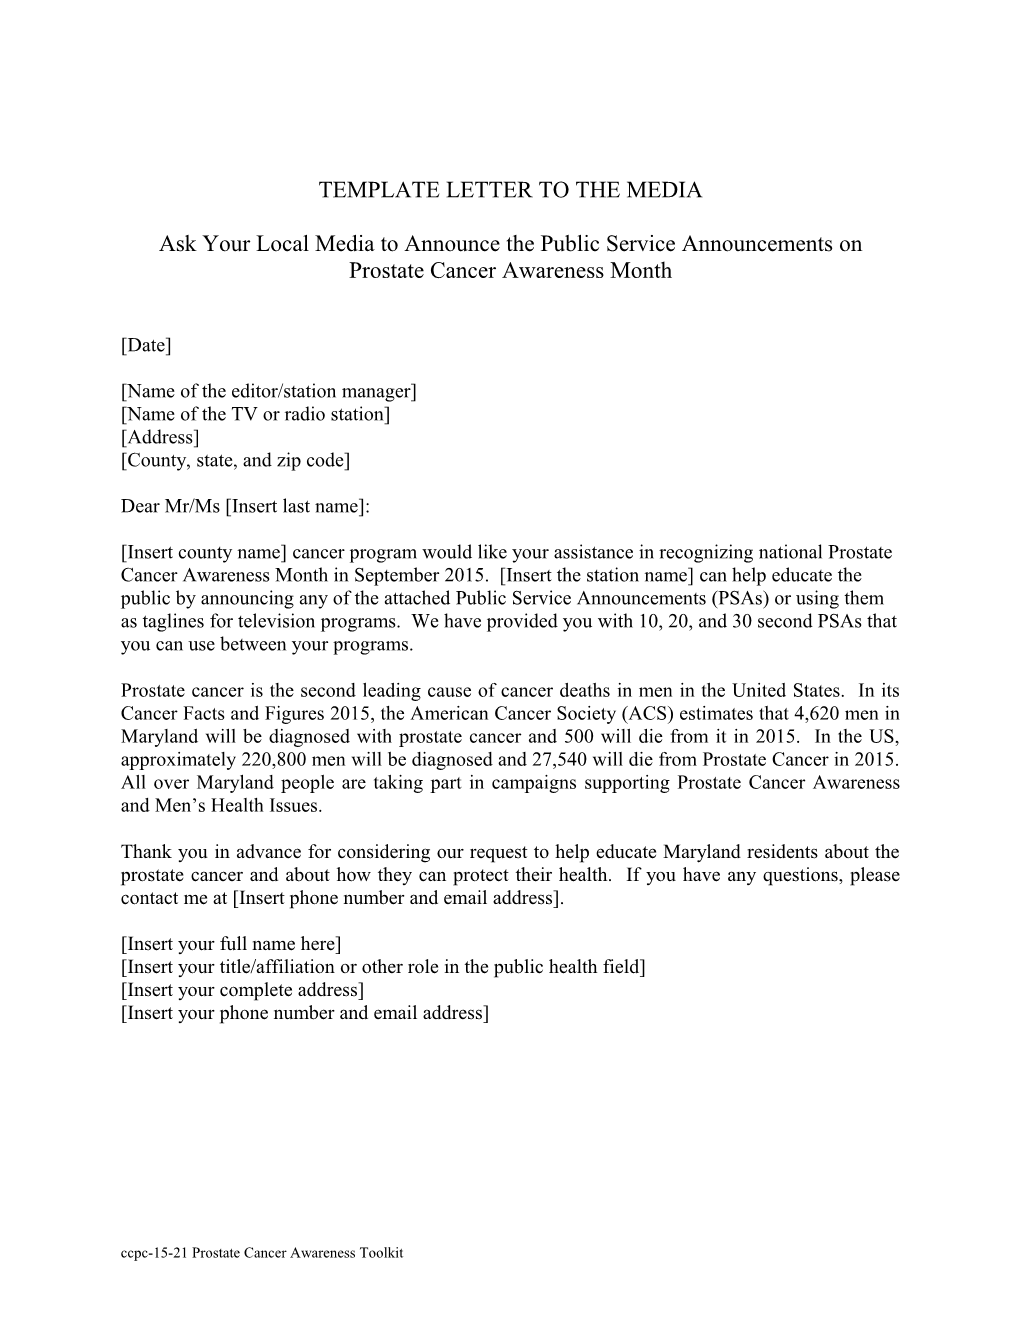 Template Letter to the Media